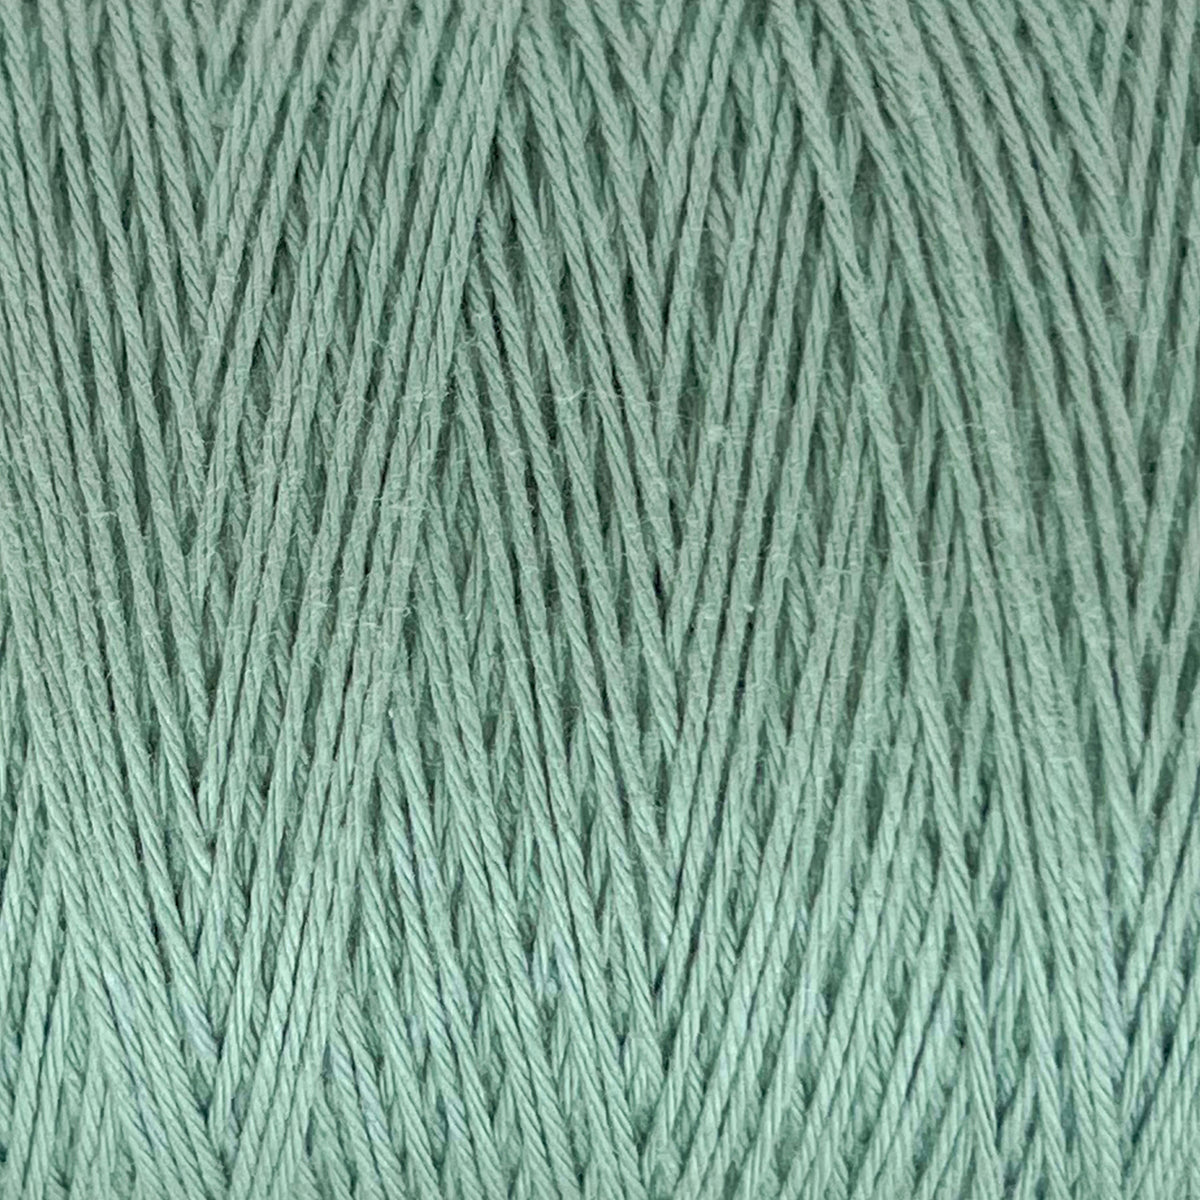 8/4 Cotton Warp Yarn - Natural and Colors - The Creativity Patch